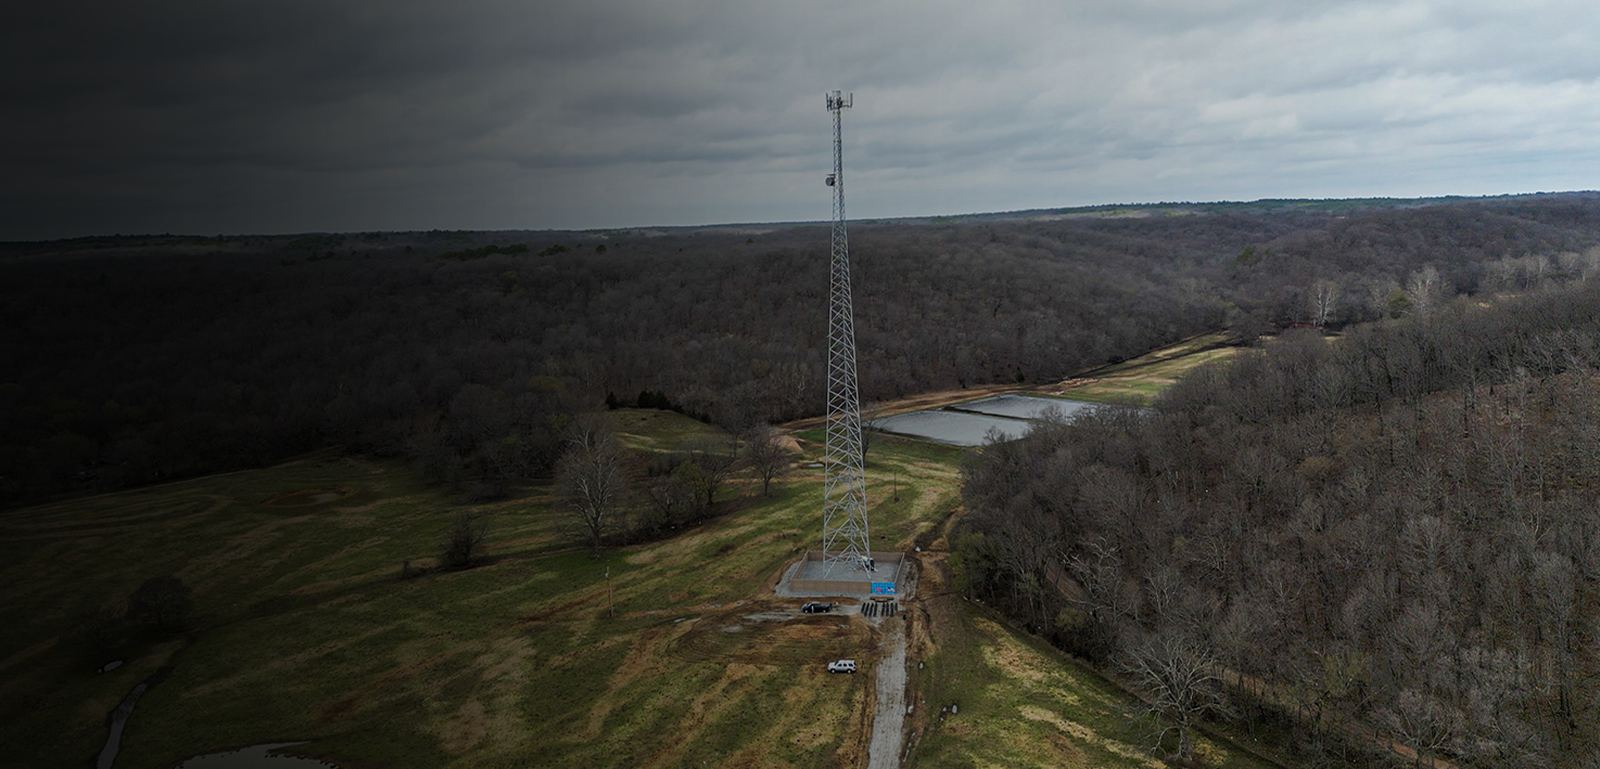 A new cell tower in Kenwood, Okla. provides AT&T 5G to the Cherokee Nation community to connect them to greater possibility.